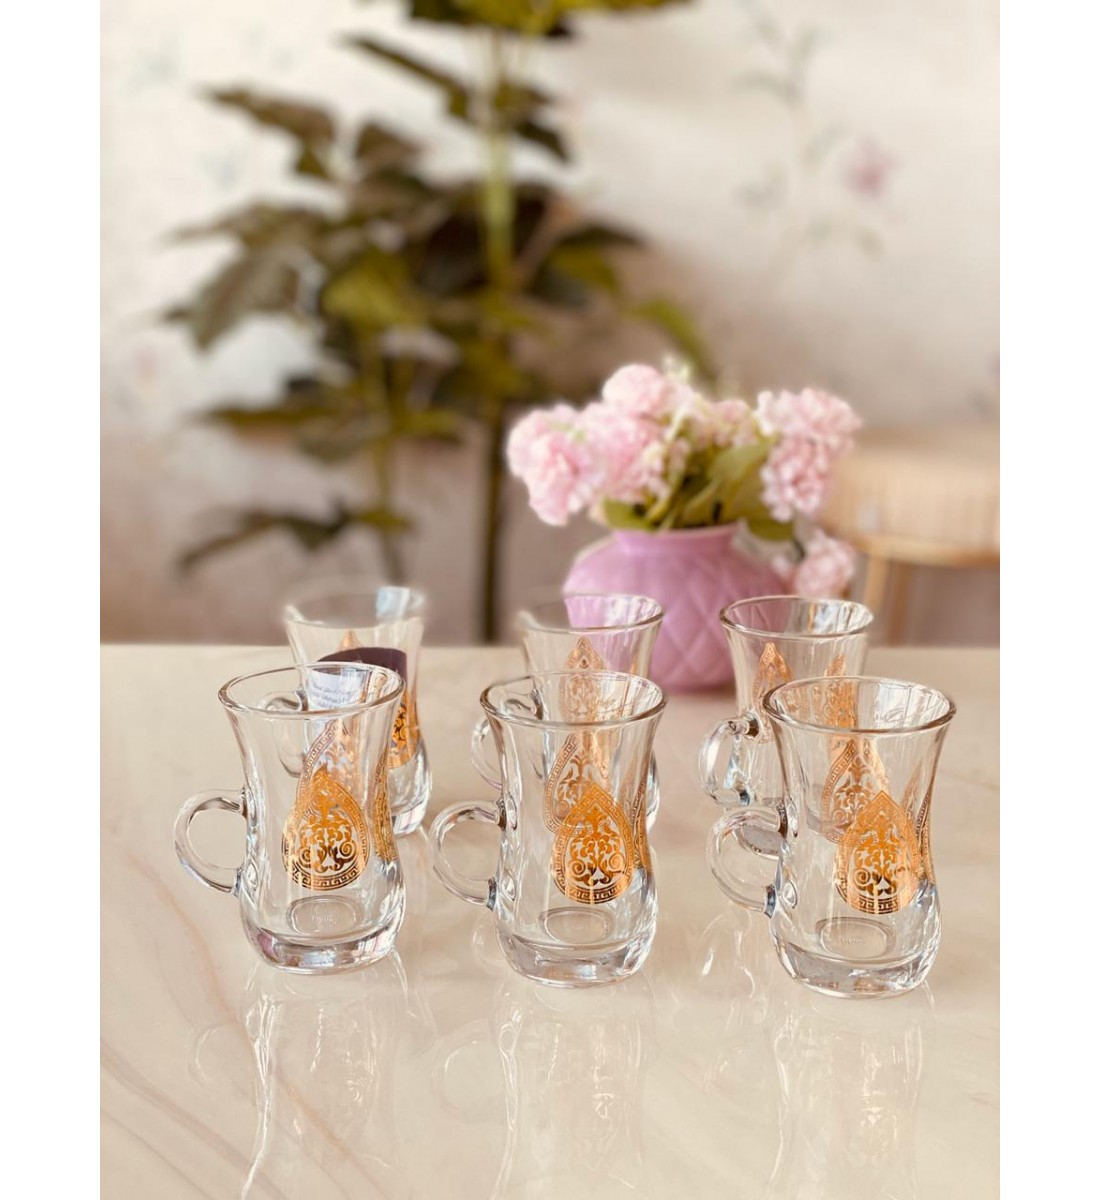 Glass Tea Dishes Set, 6 Pieces, Transparent, Gilded from Damlag-42621